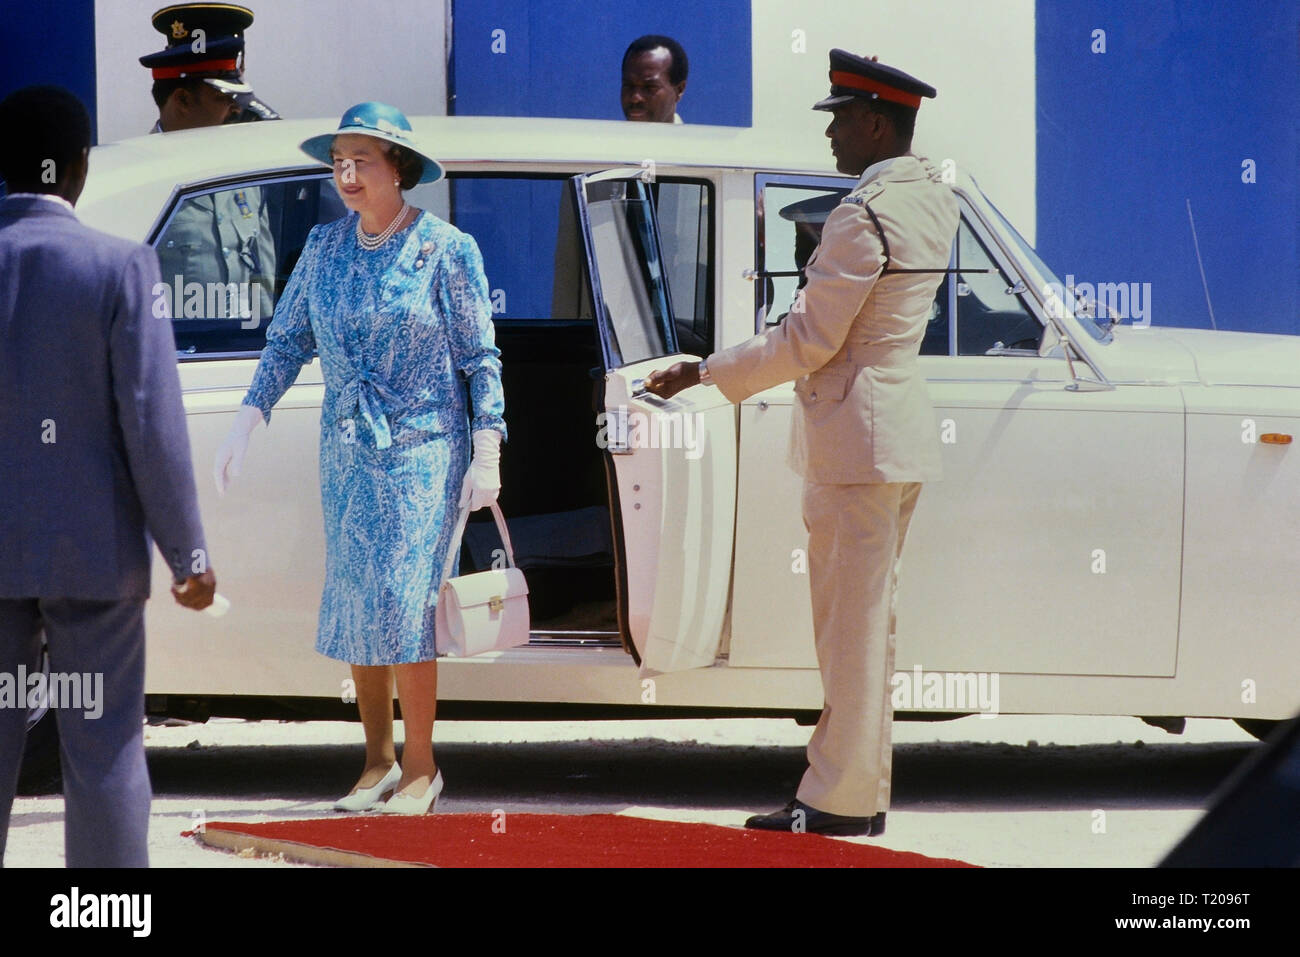 Queen Elizabeth II visit to Queen's College to officiate at a stone laying ceremony for the new school building. Barbados, Caribbean. 1989 Stock Photo